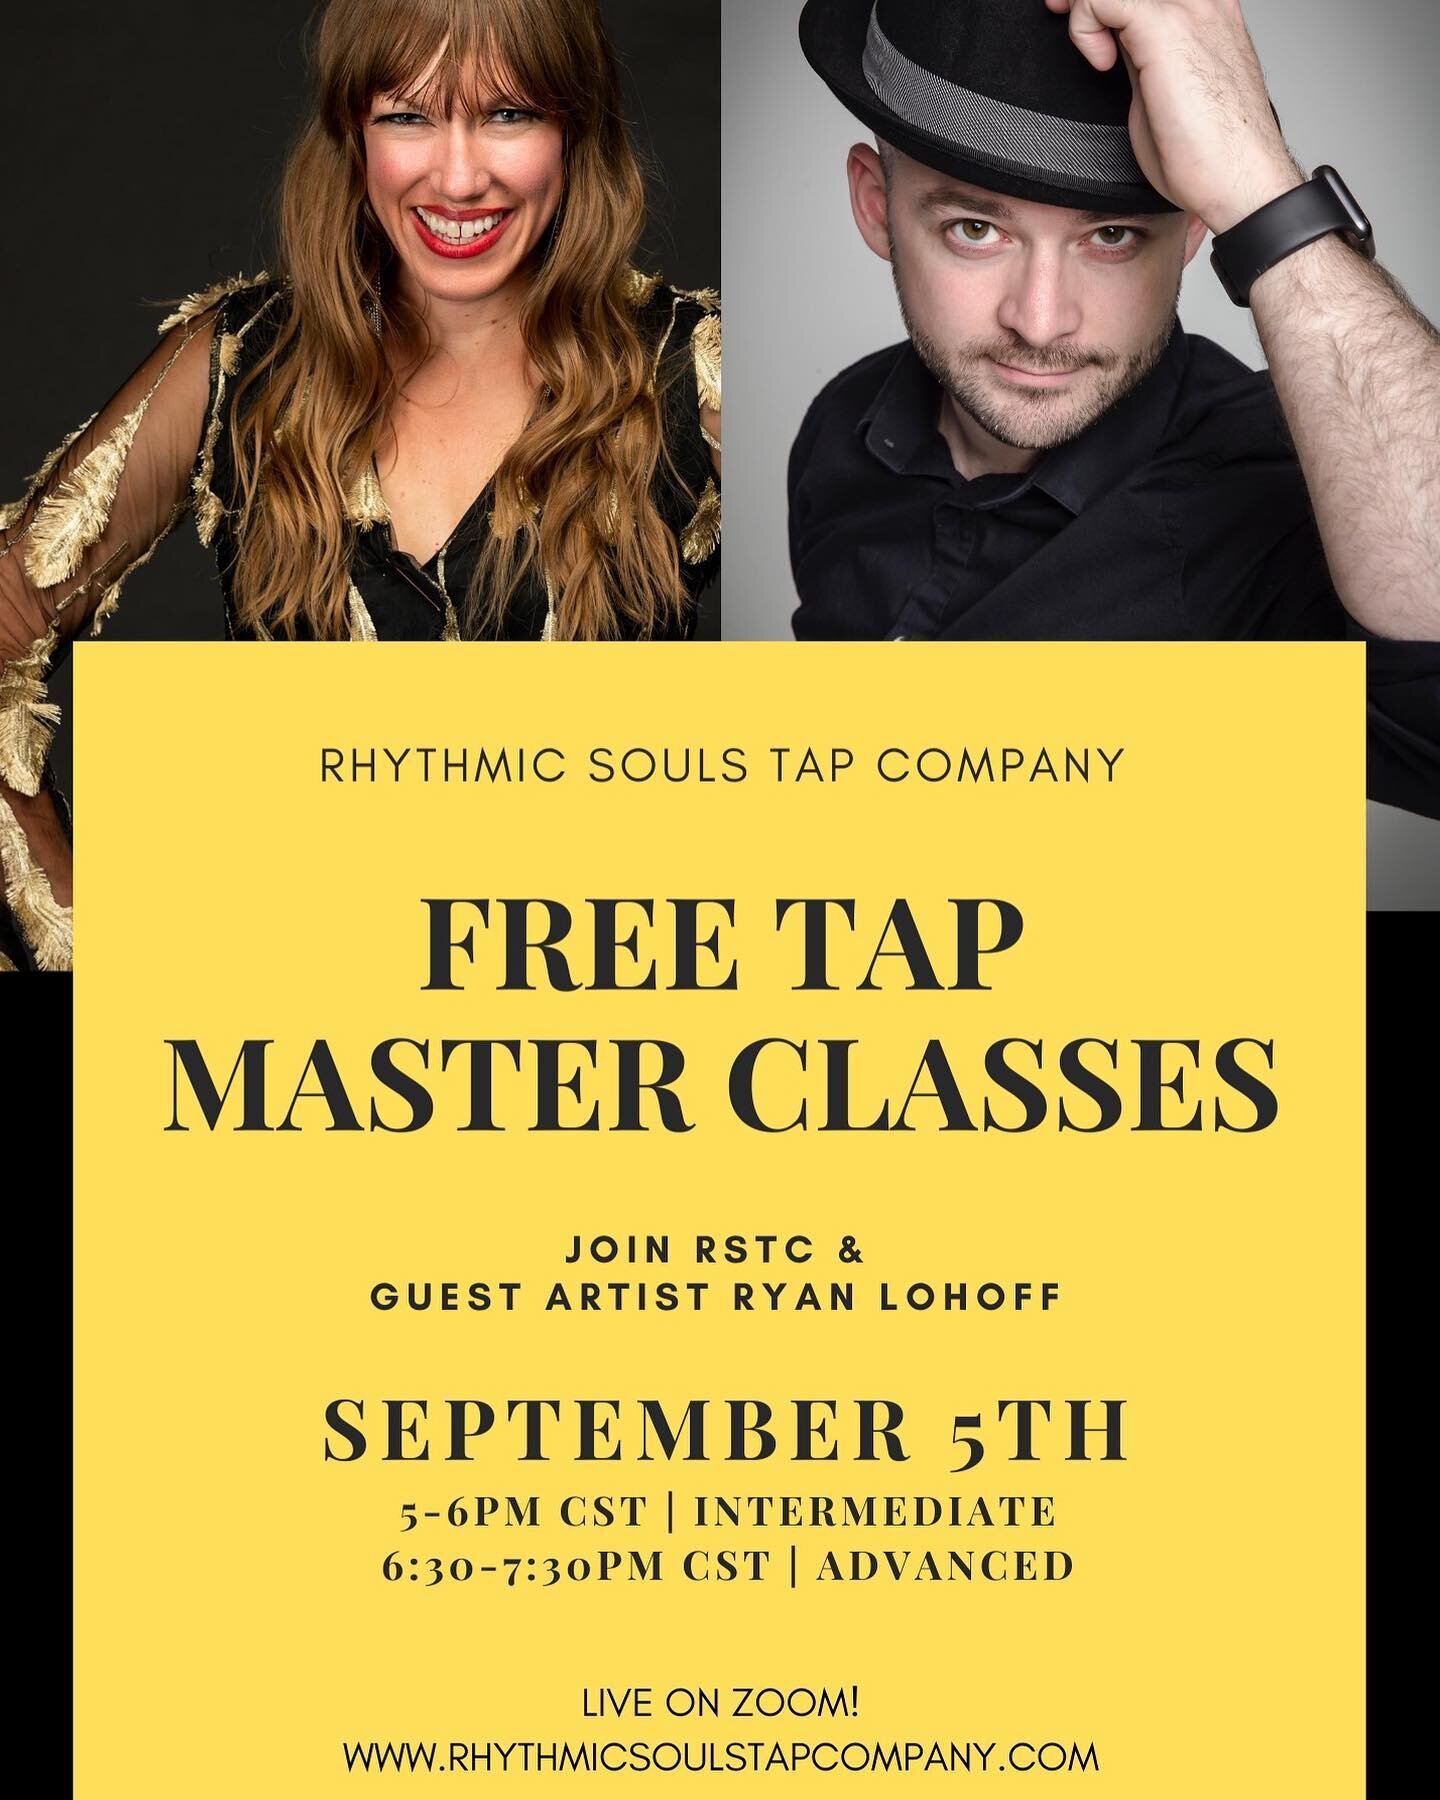 ⠀
🌟REGISTRATION NOW OPEN!!!🌟⠀
⠀
Join RSTC &amp; special guest @tapman83 for FREE Online Master Classes on September 5th!⠀
⠀
5-6pm CST Intermediate Tap⠀
6:30-7:30pm CST Advanced Tap⠀
⠀
Sign up through our website to secure your spot! Link in bio. Sp